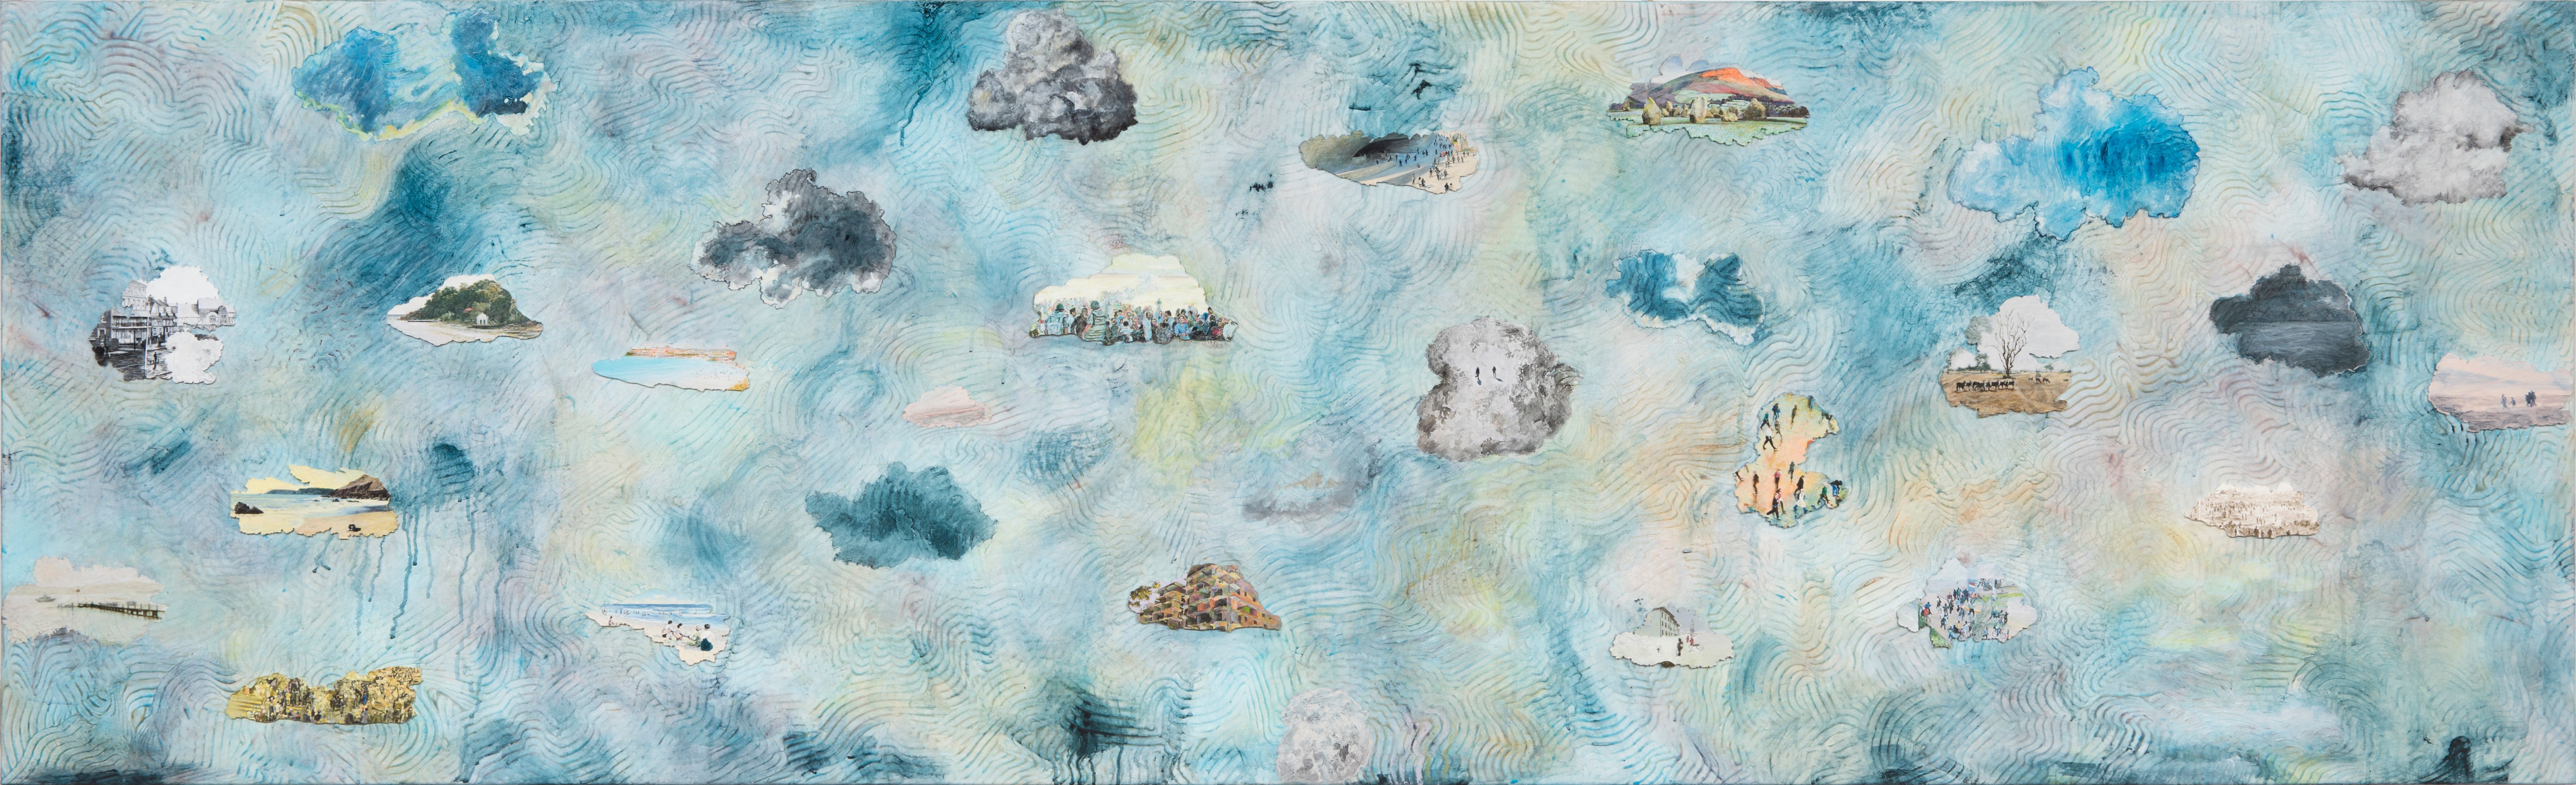 Vivienne Binns, <em>Minding Clouds</em>, 2016, acrylic and masonite on canvas, 90 x 296 cm. Private collection, Melbourne. Photo: Andrew Curtis, courtesy of Sutton Gallery, Melbourne.